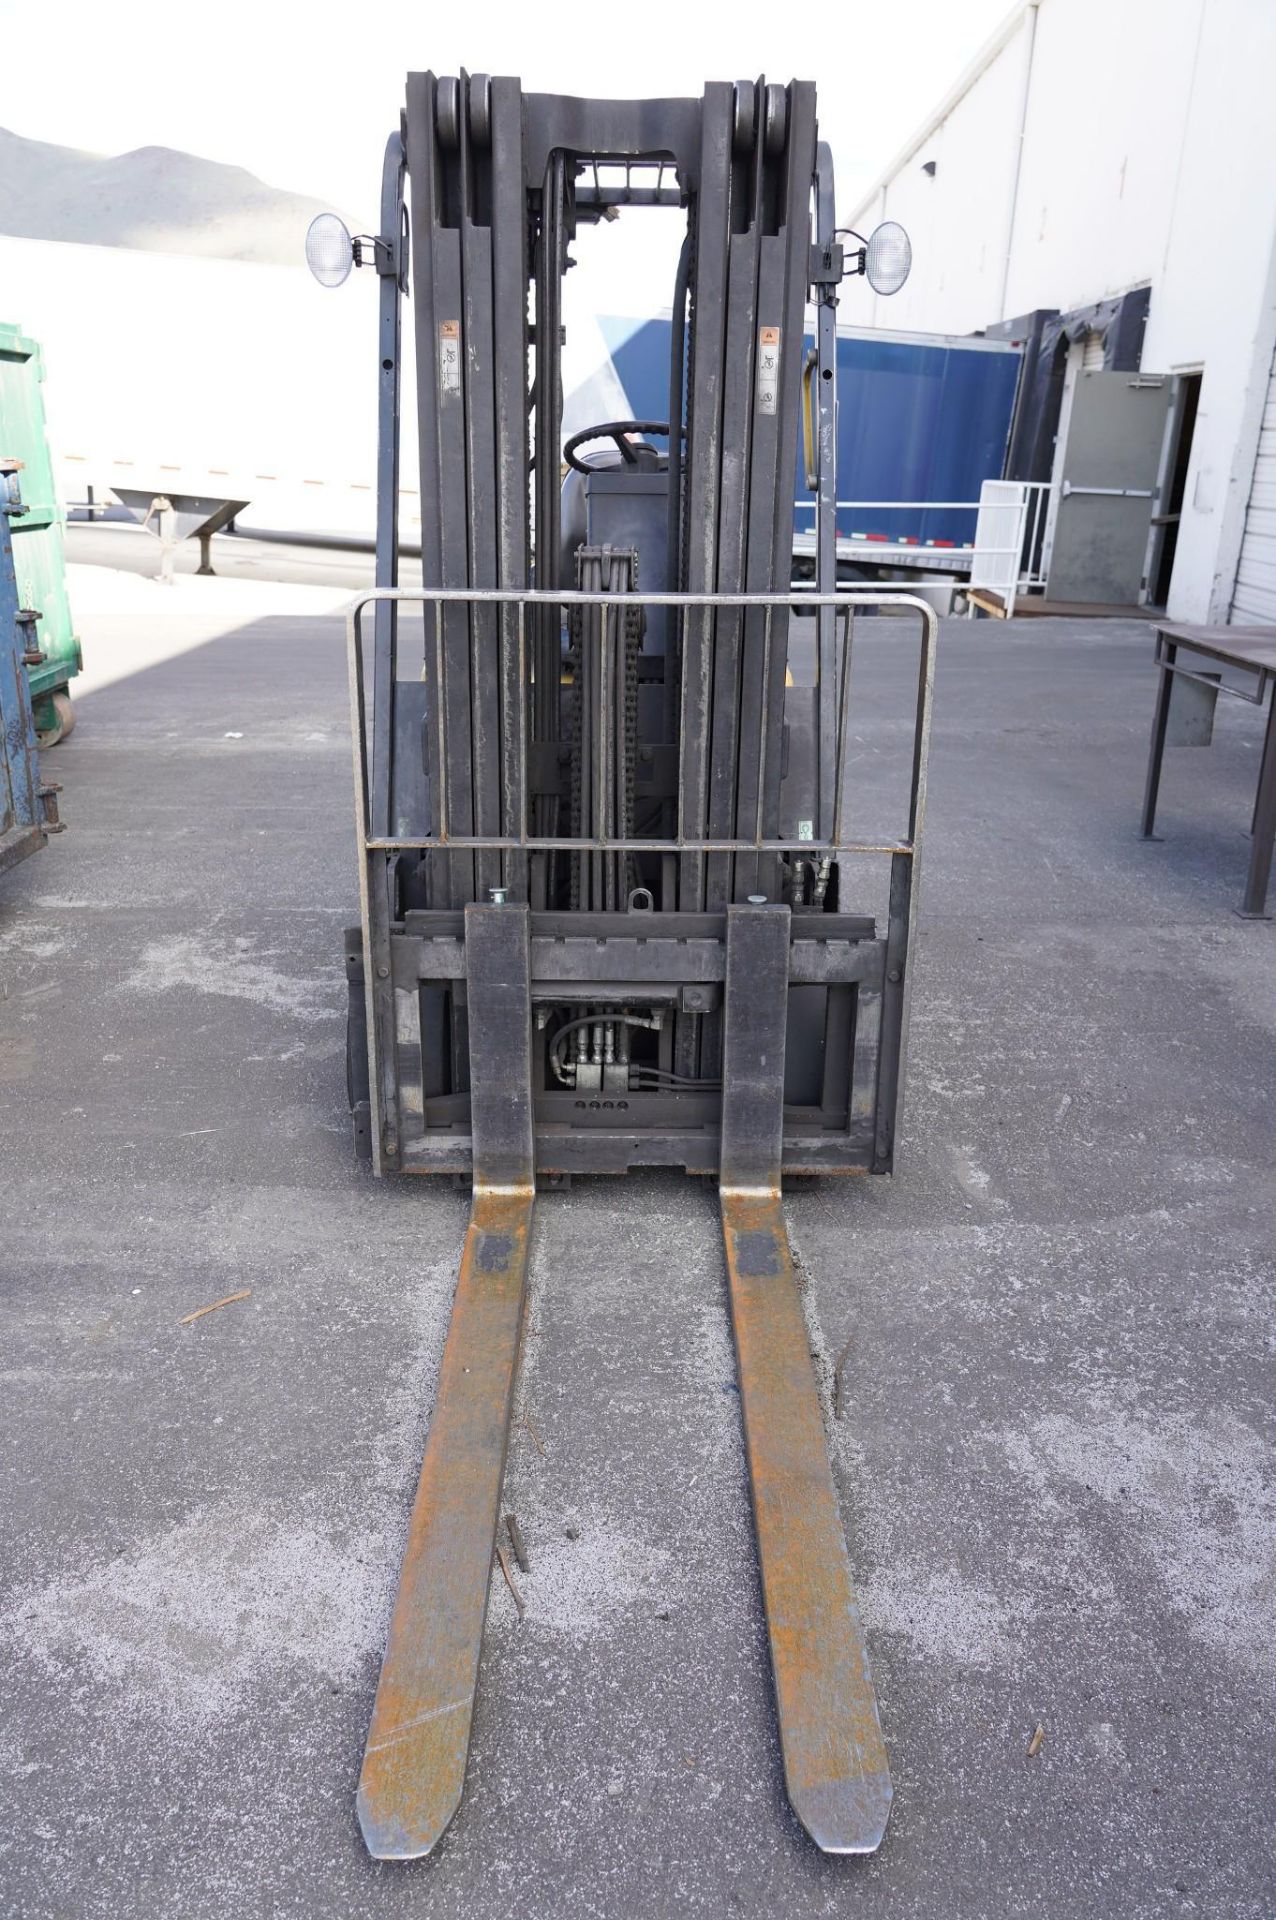 DAEWOO GC30E 5,000 LBS. CAPACITY FORKLIFT - Image 3 of 14